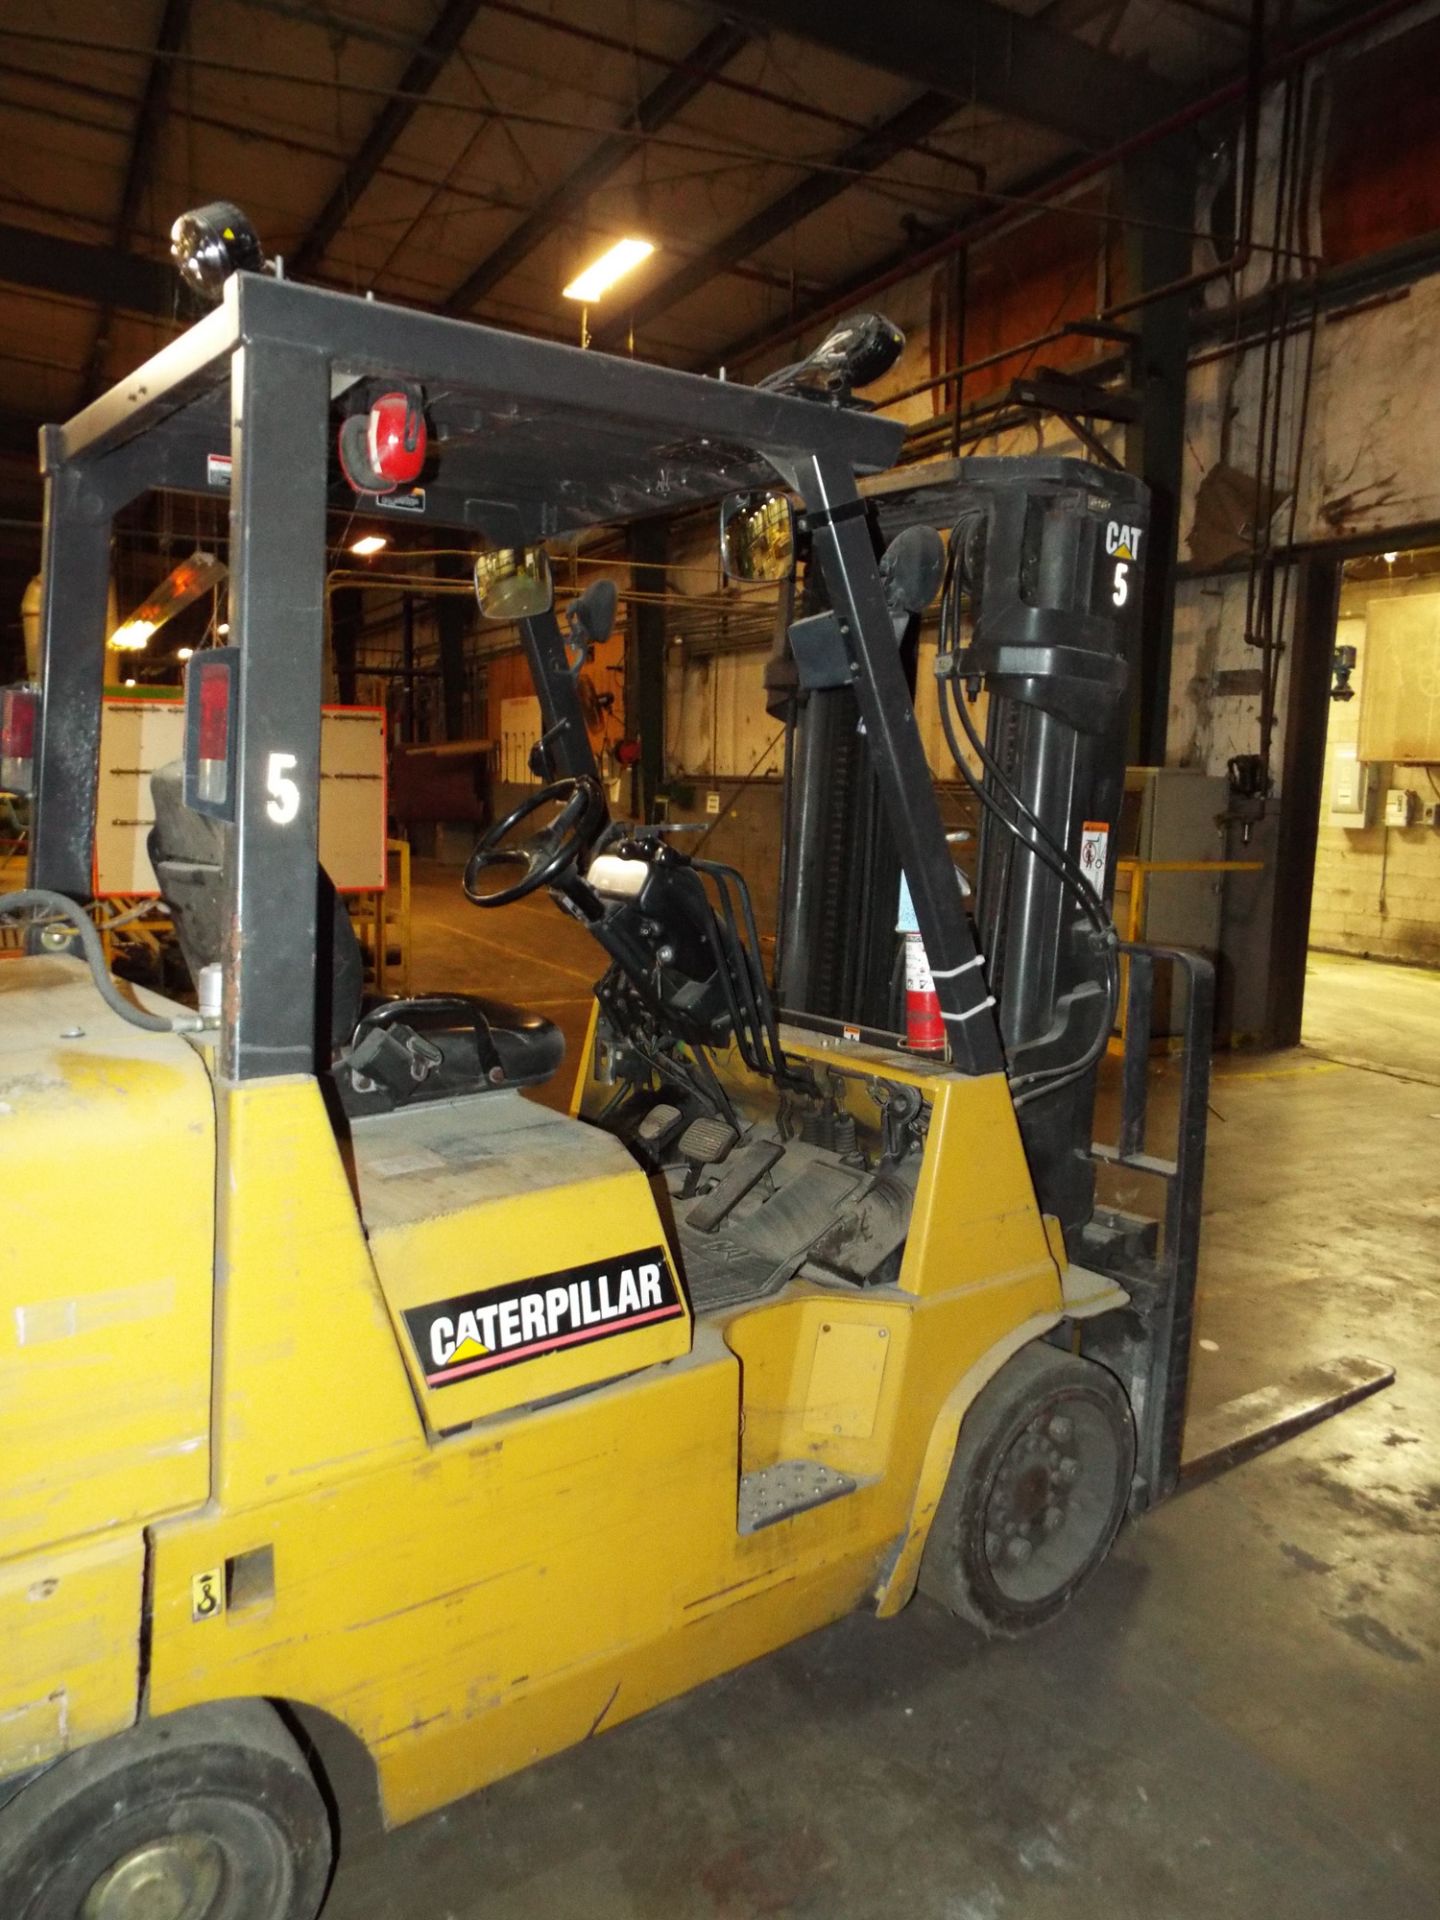 CATERPILLAR (2006) GC40K1 LPG FORKLIFT WITH 8000 LB. CAPACITY, 120" MAX. LIFT HEIGHT, SIDE SHIFT,